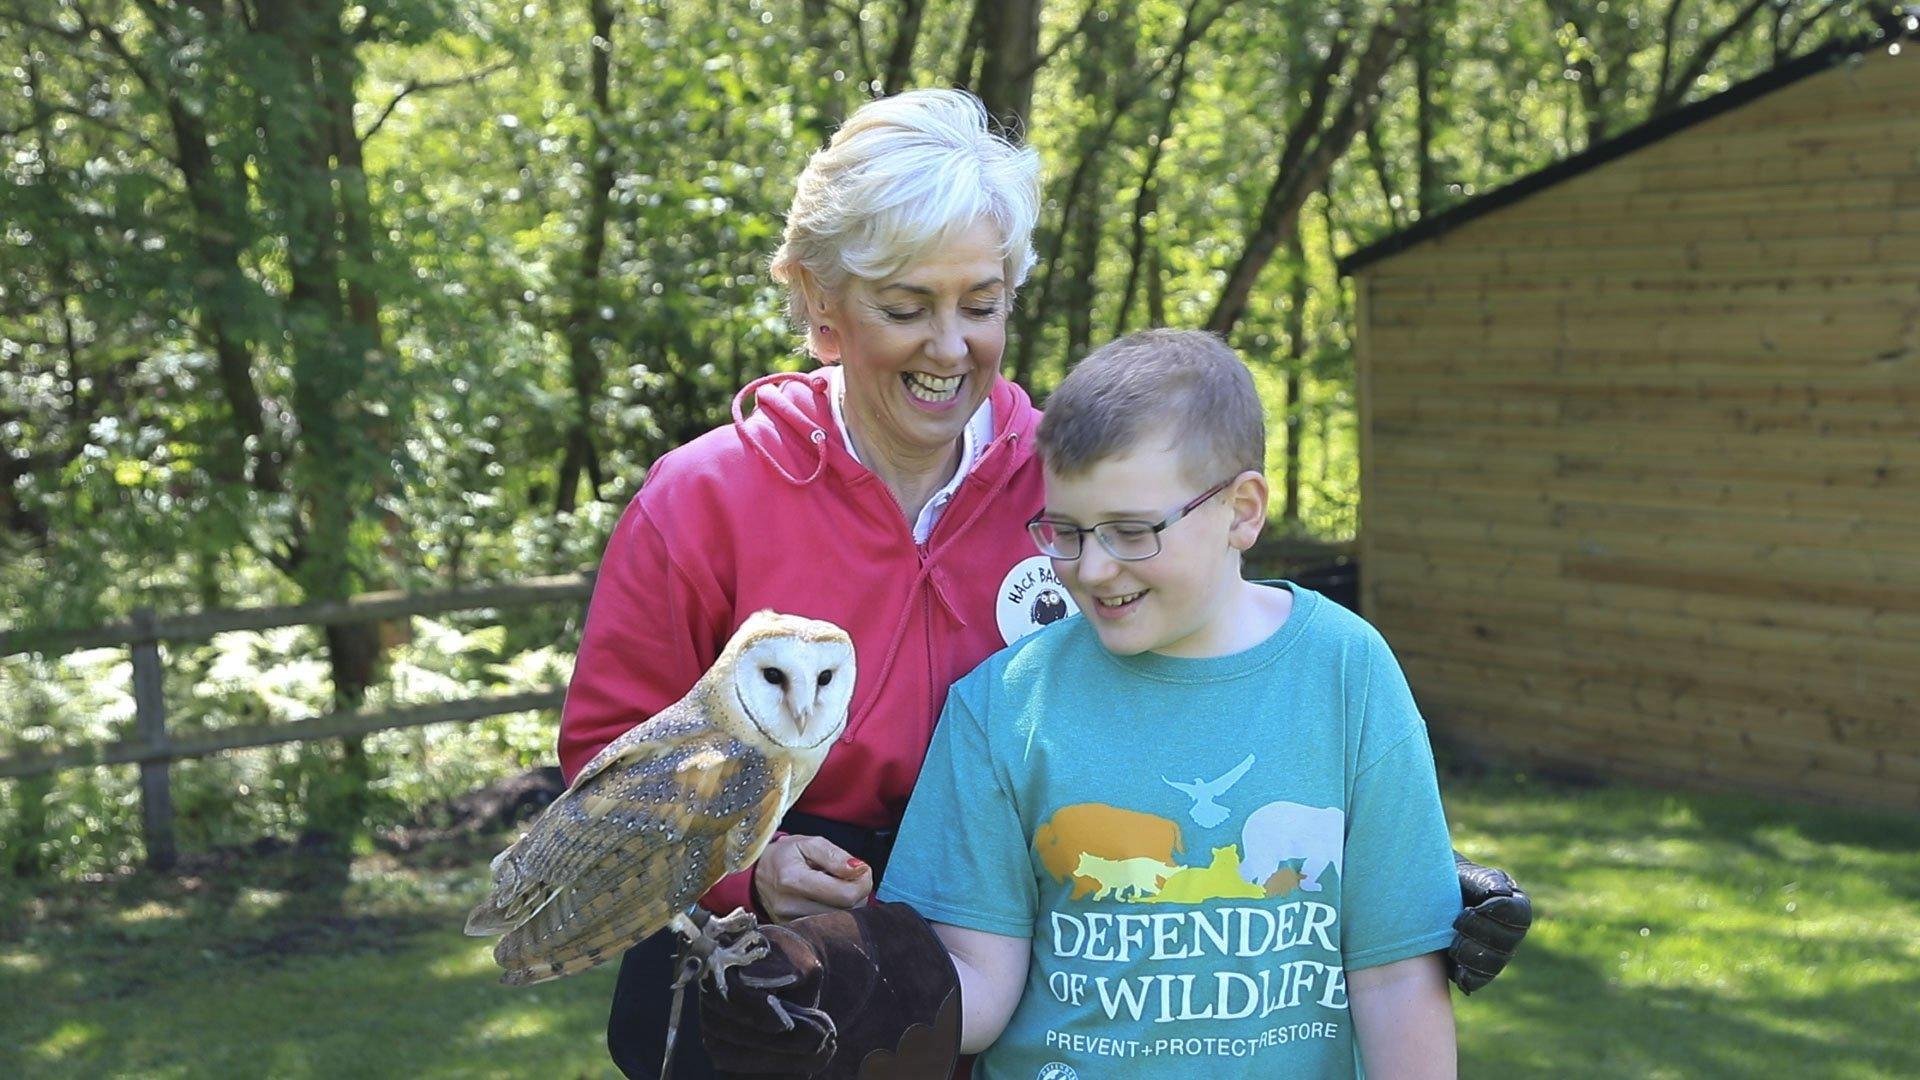 News: Wise and serene, owl power swoops into animal therapy in England  GLOBAL HEROES MAGAZINE